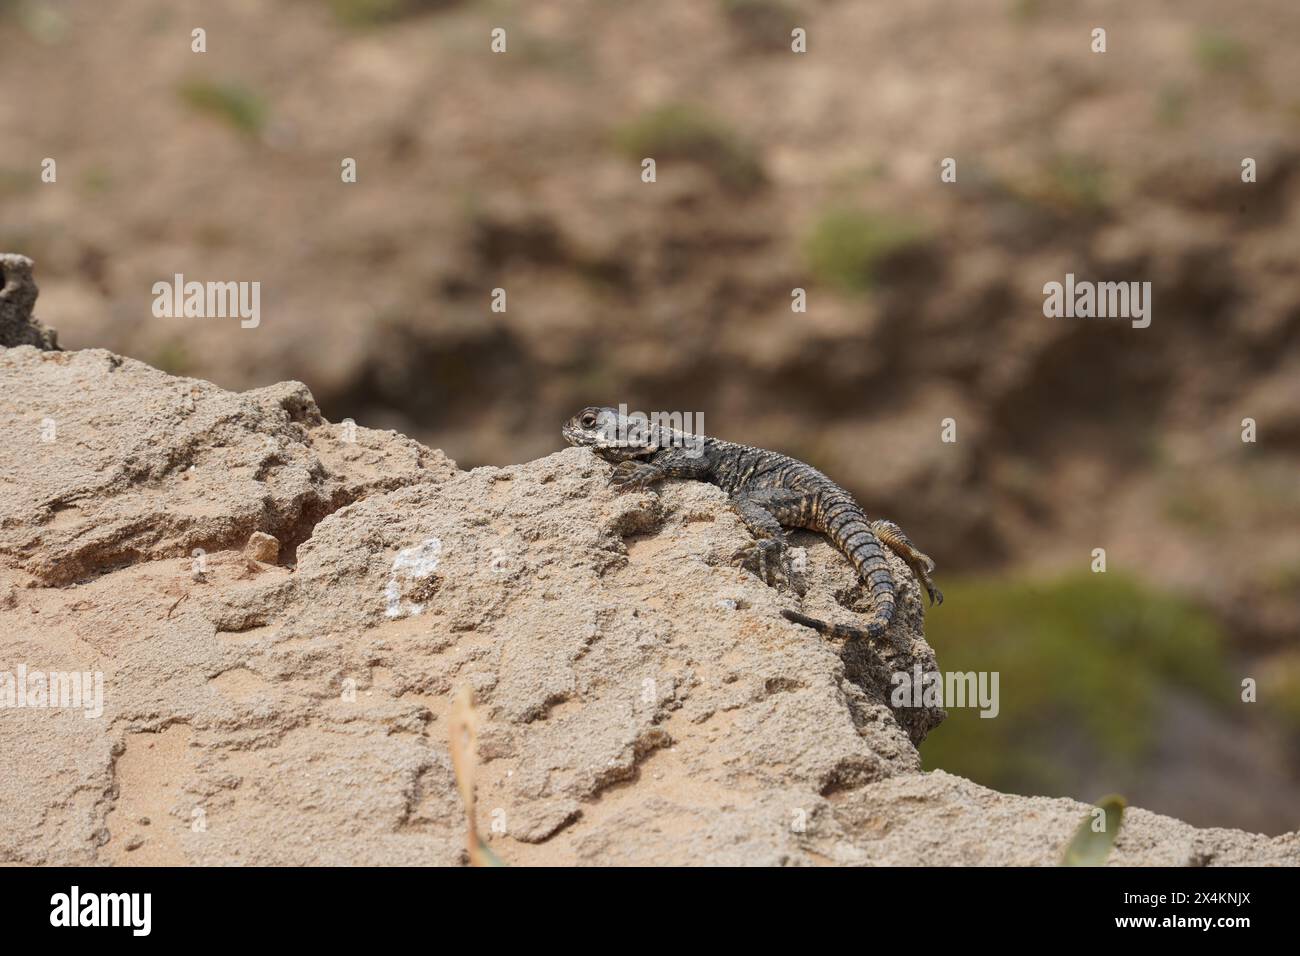 Starred agama enjoing the sun on the rocks in Israel close-up. The brightly lit by the sun lizard on stones Stock Photo